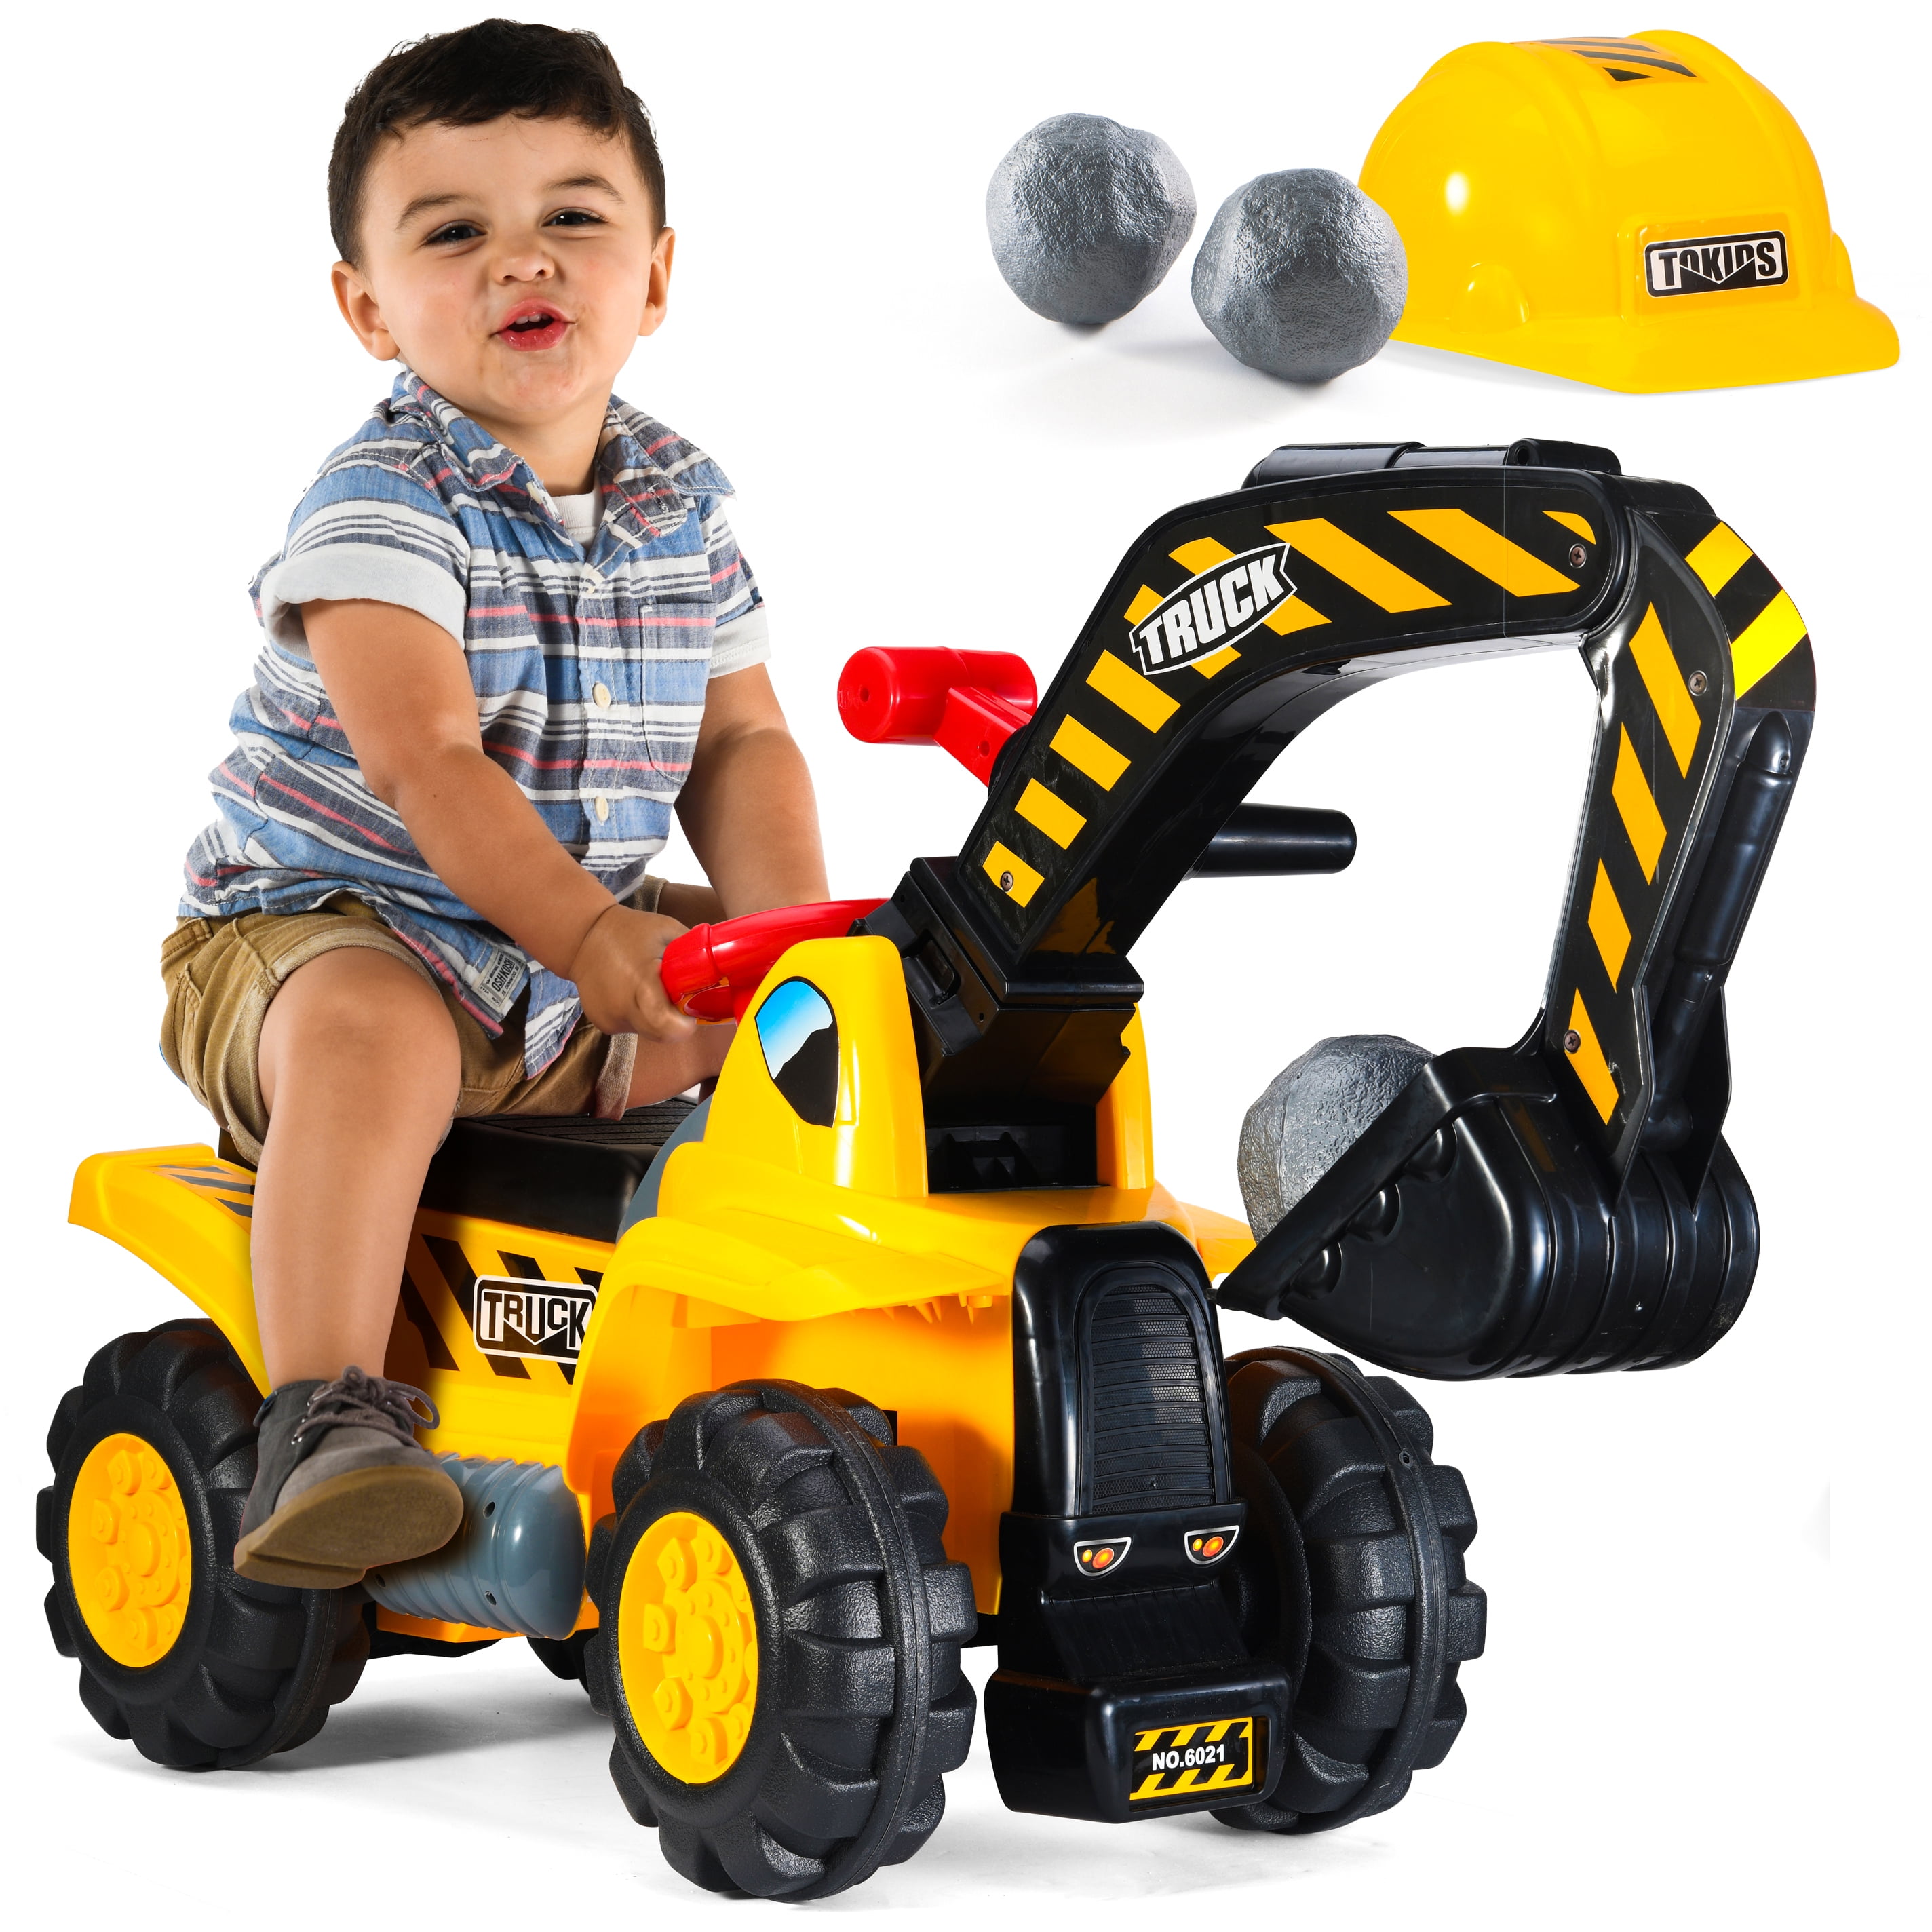 Digger Toys, Toy Diggers, Truck Toys & Sand Digger Toys